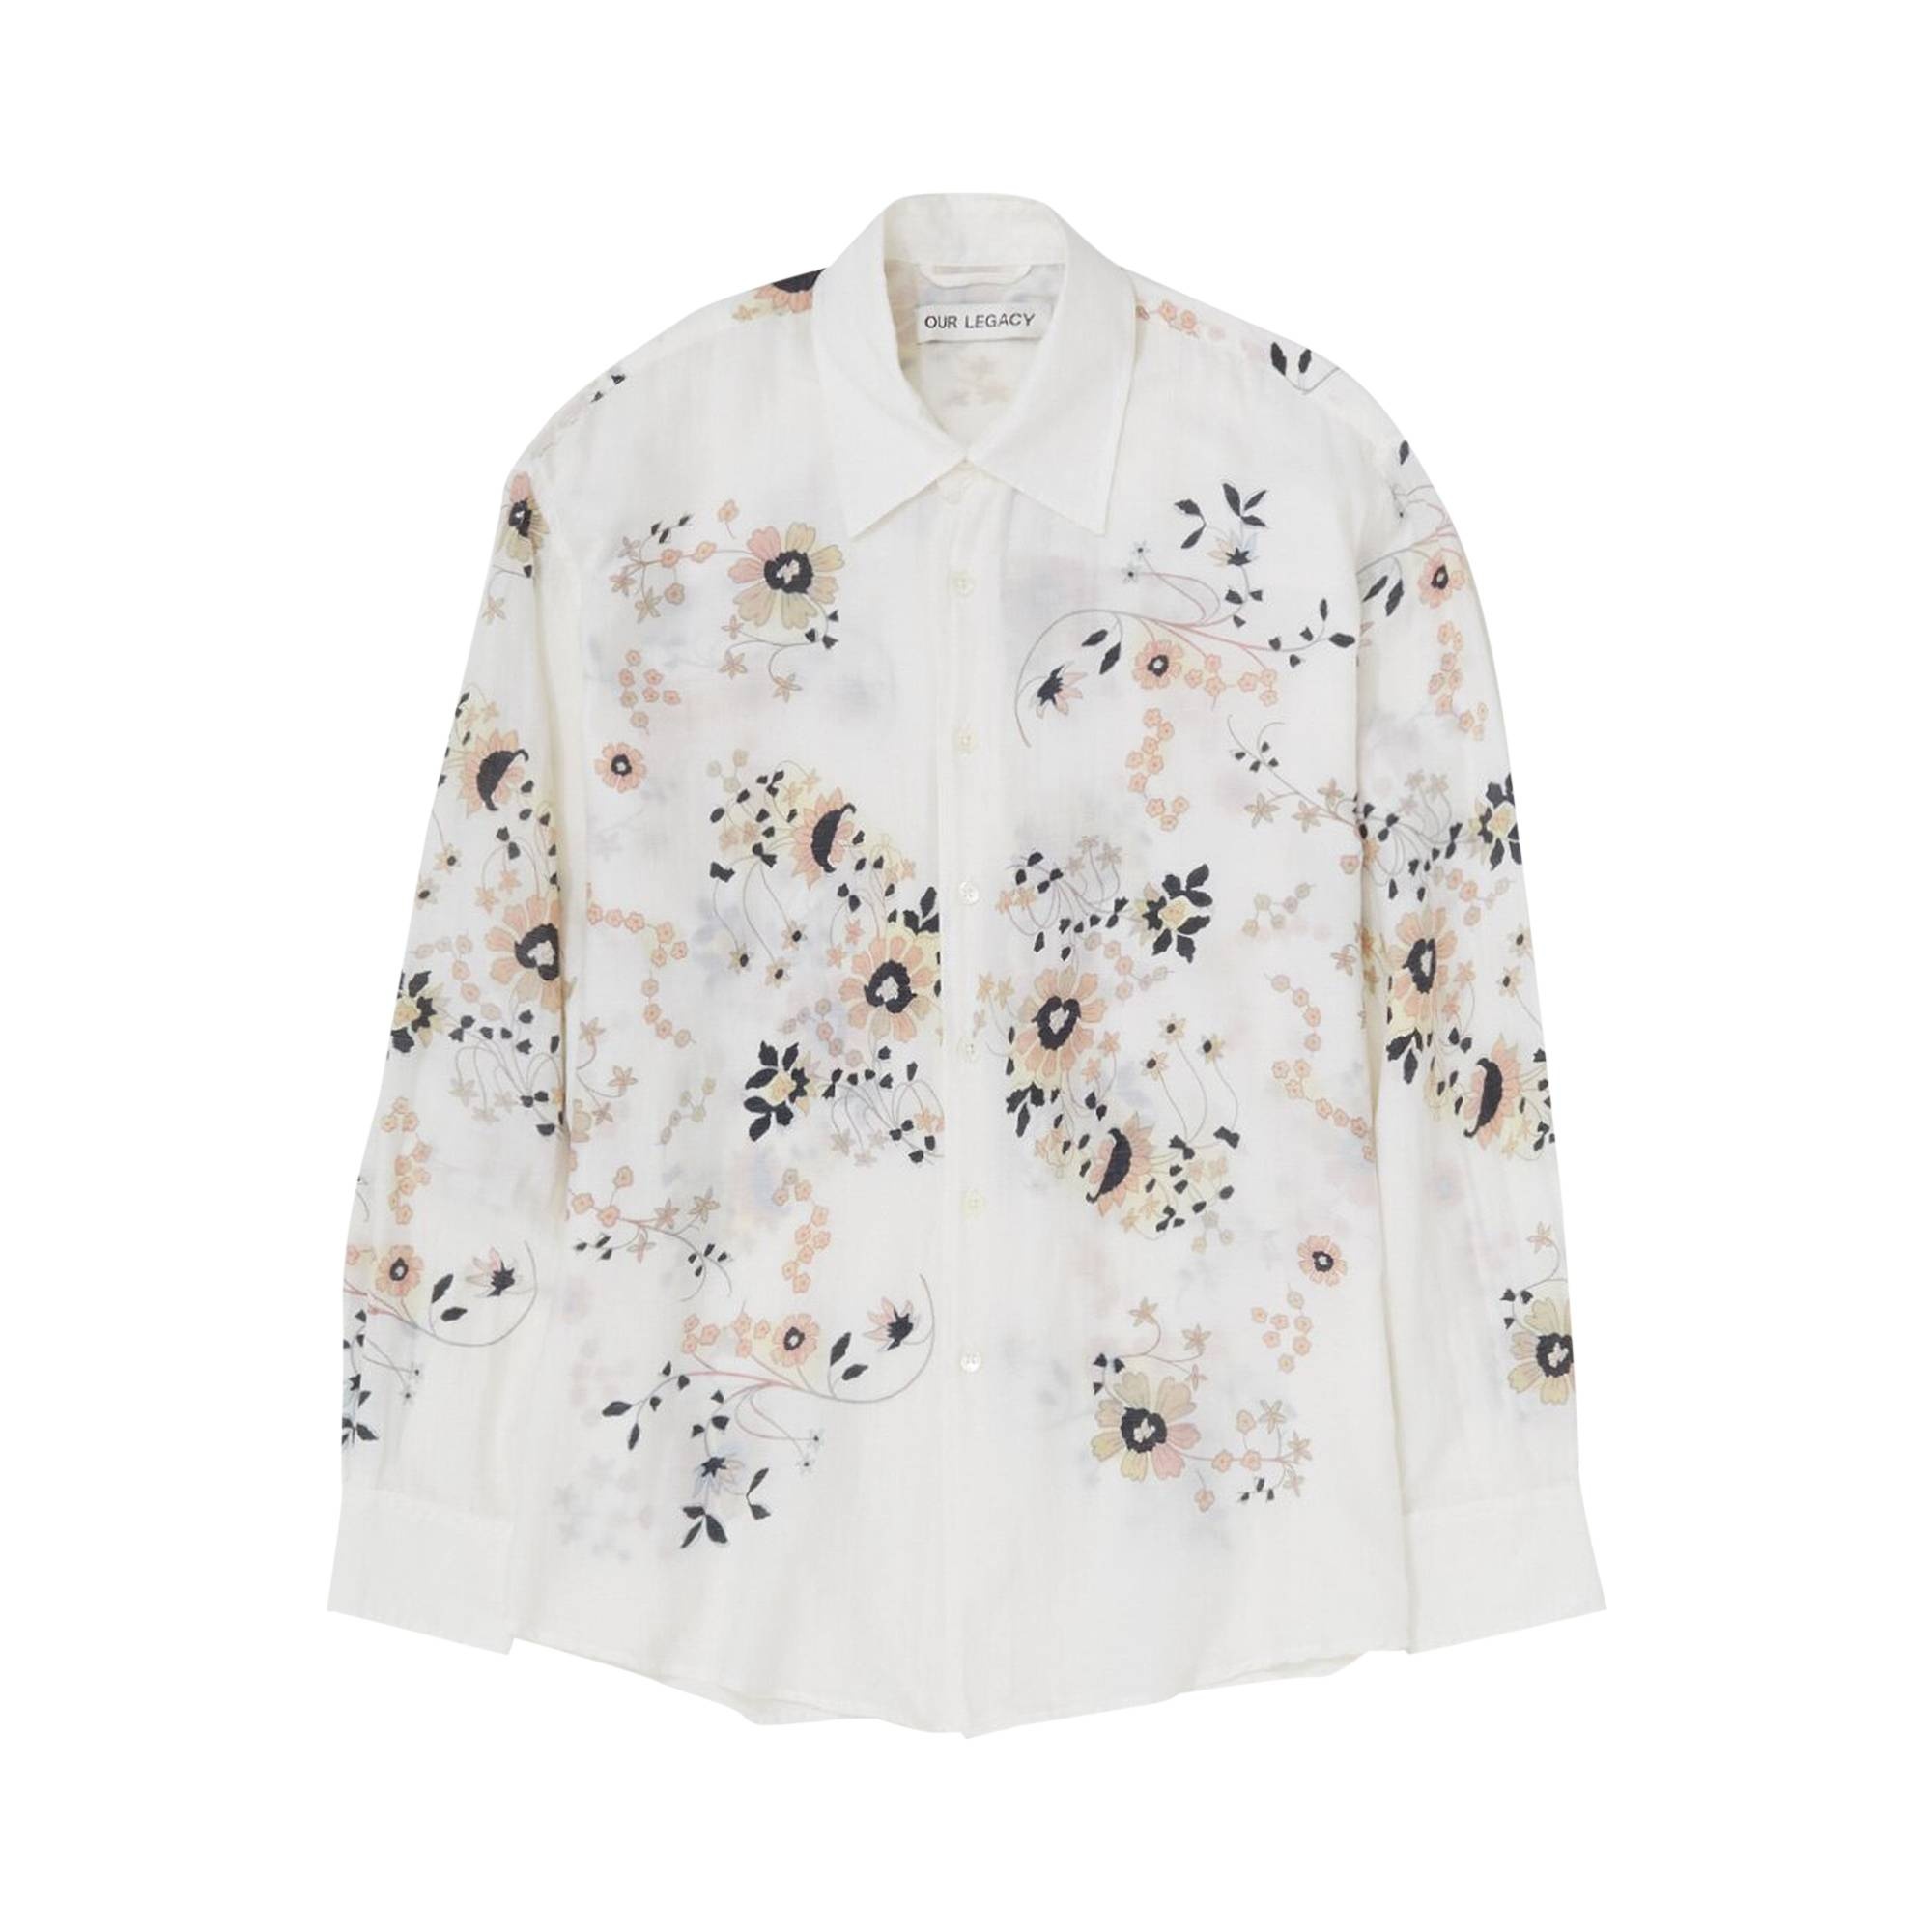 Our Legacy Eastern Flower Print Above Shirt 'White' - 1